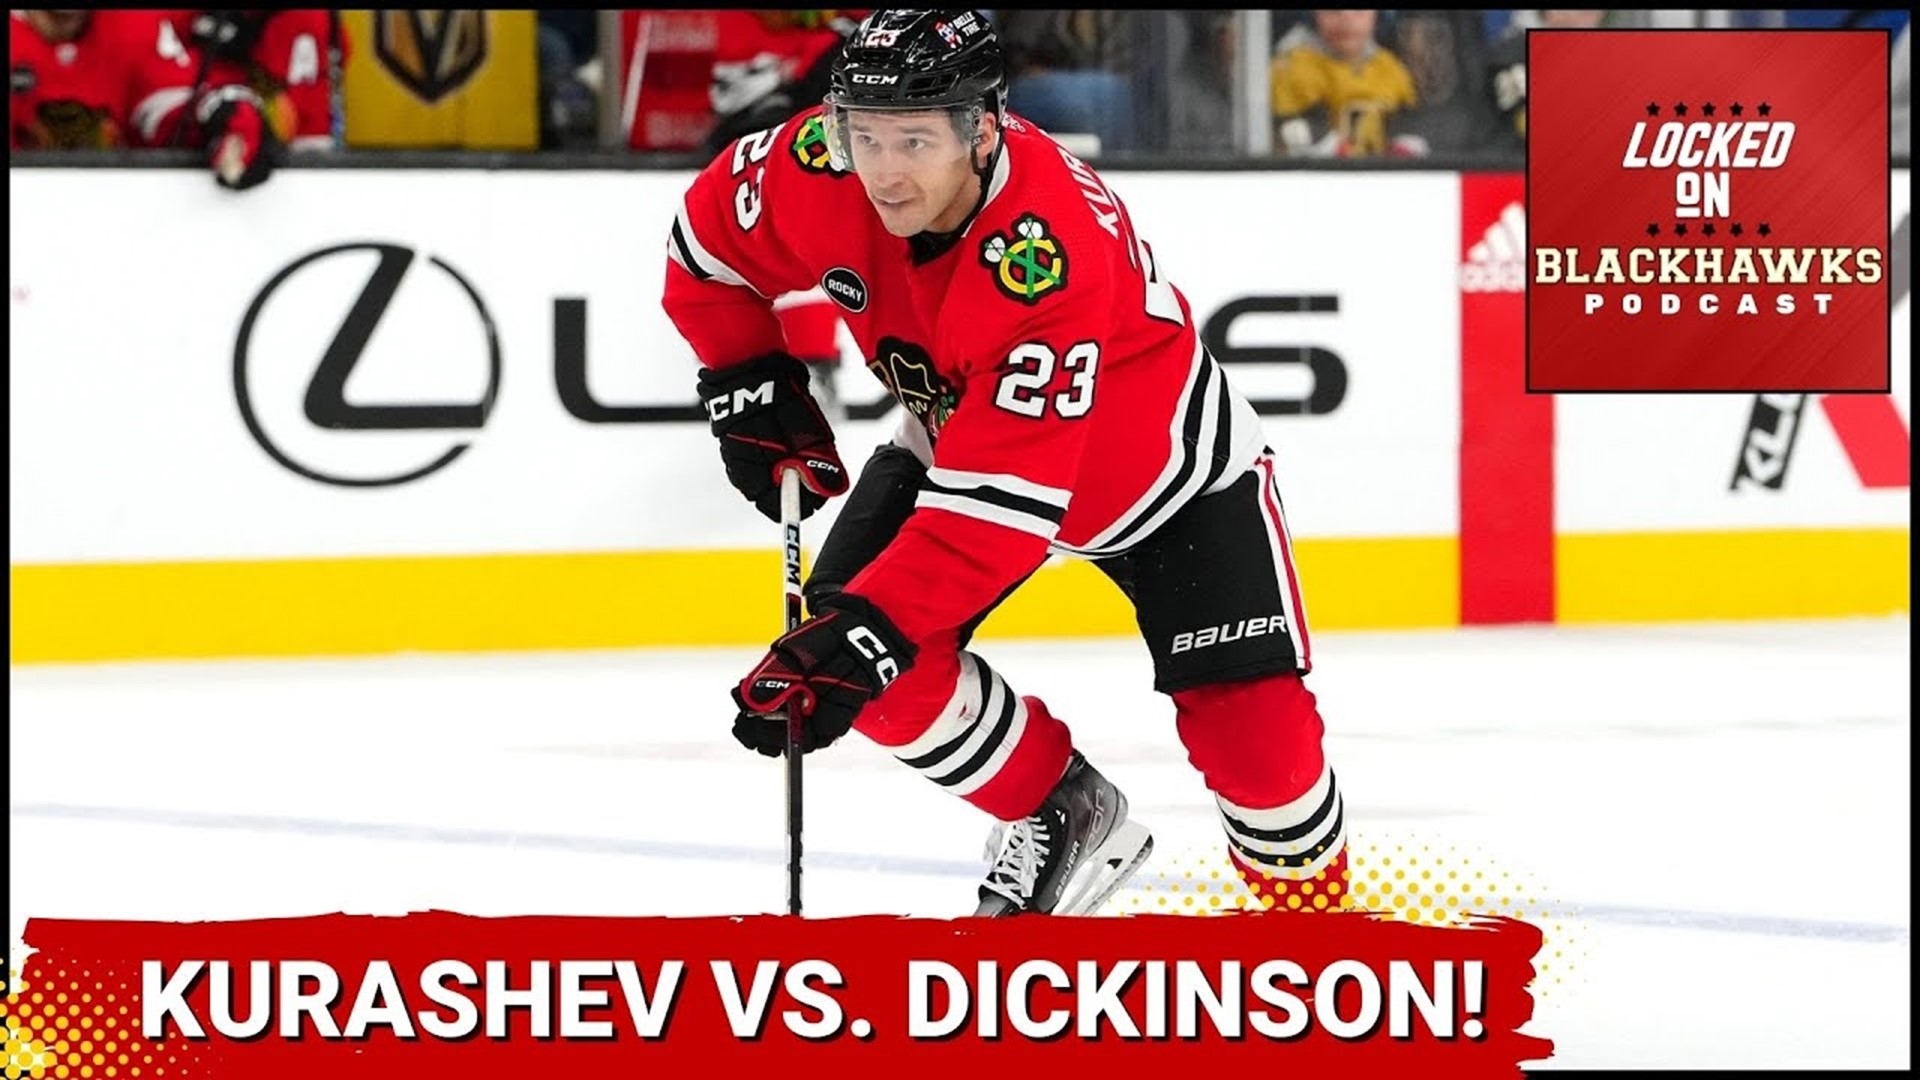 Thursday's episode begins with a preview of the Chicago Blackhawks' matchup with the Ottawa Senators at Canada Tire Center.